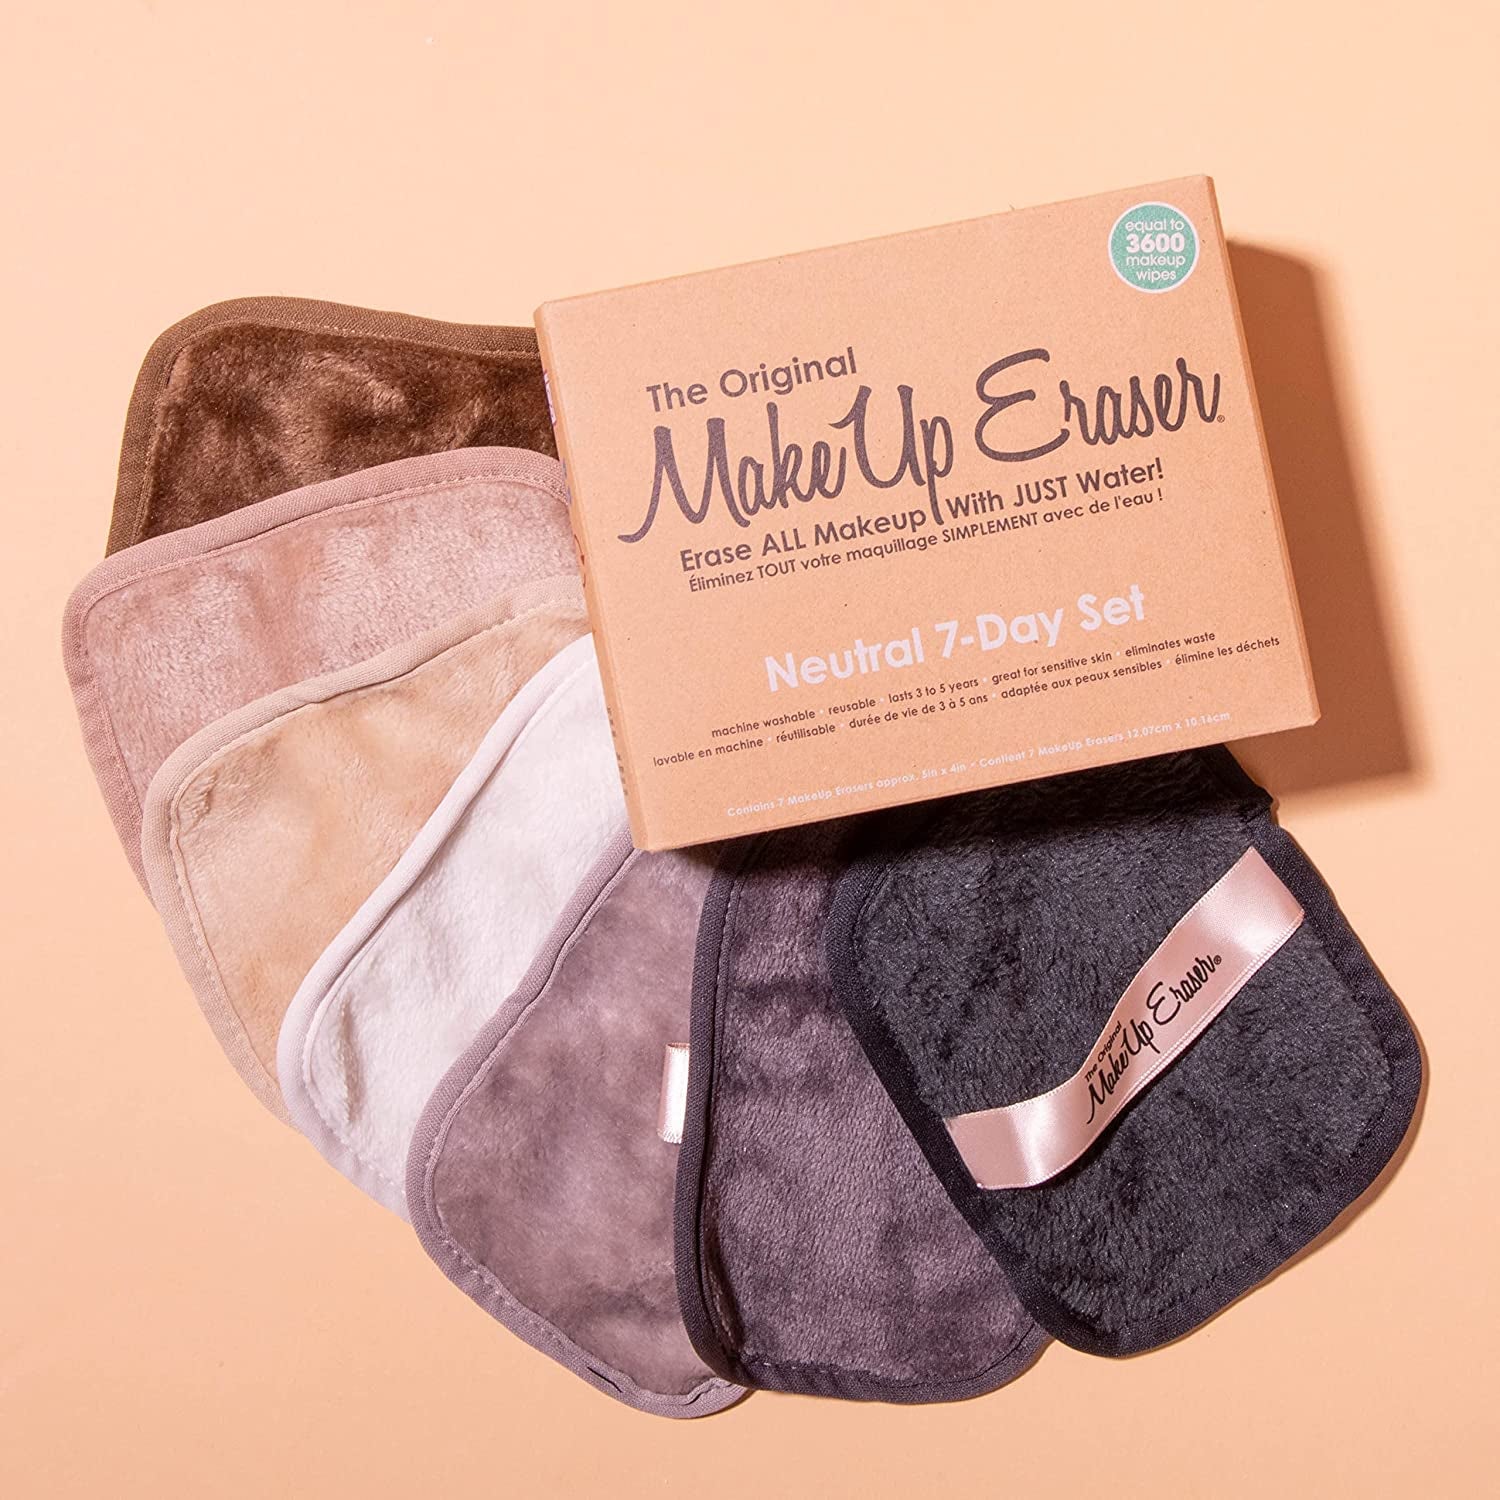 the makeup eraser cloth set that has cloths in various shades of brown from dark to light 